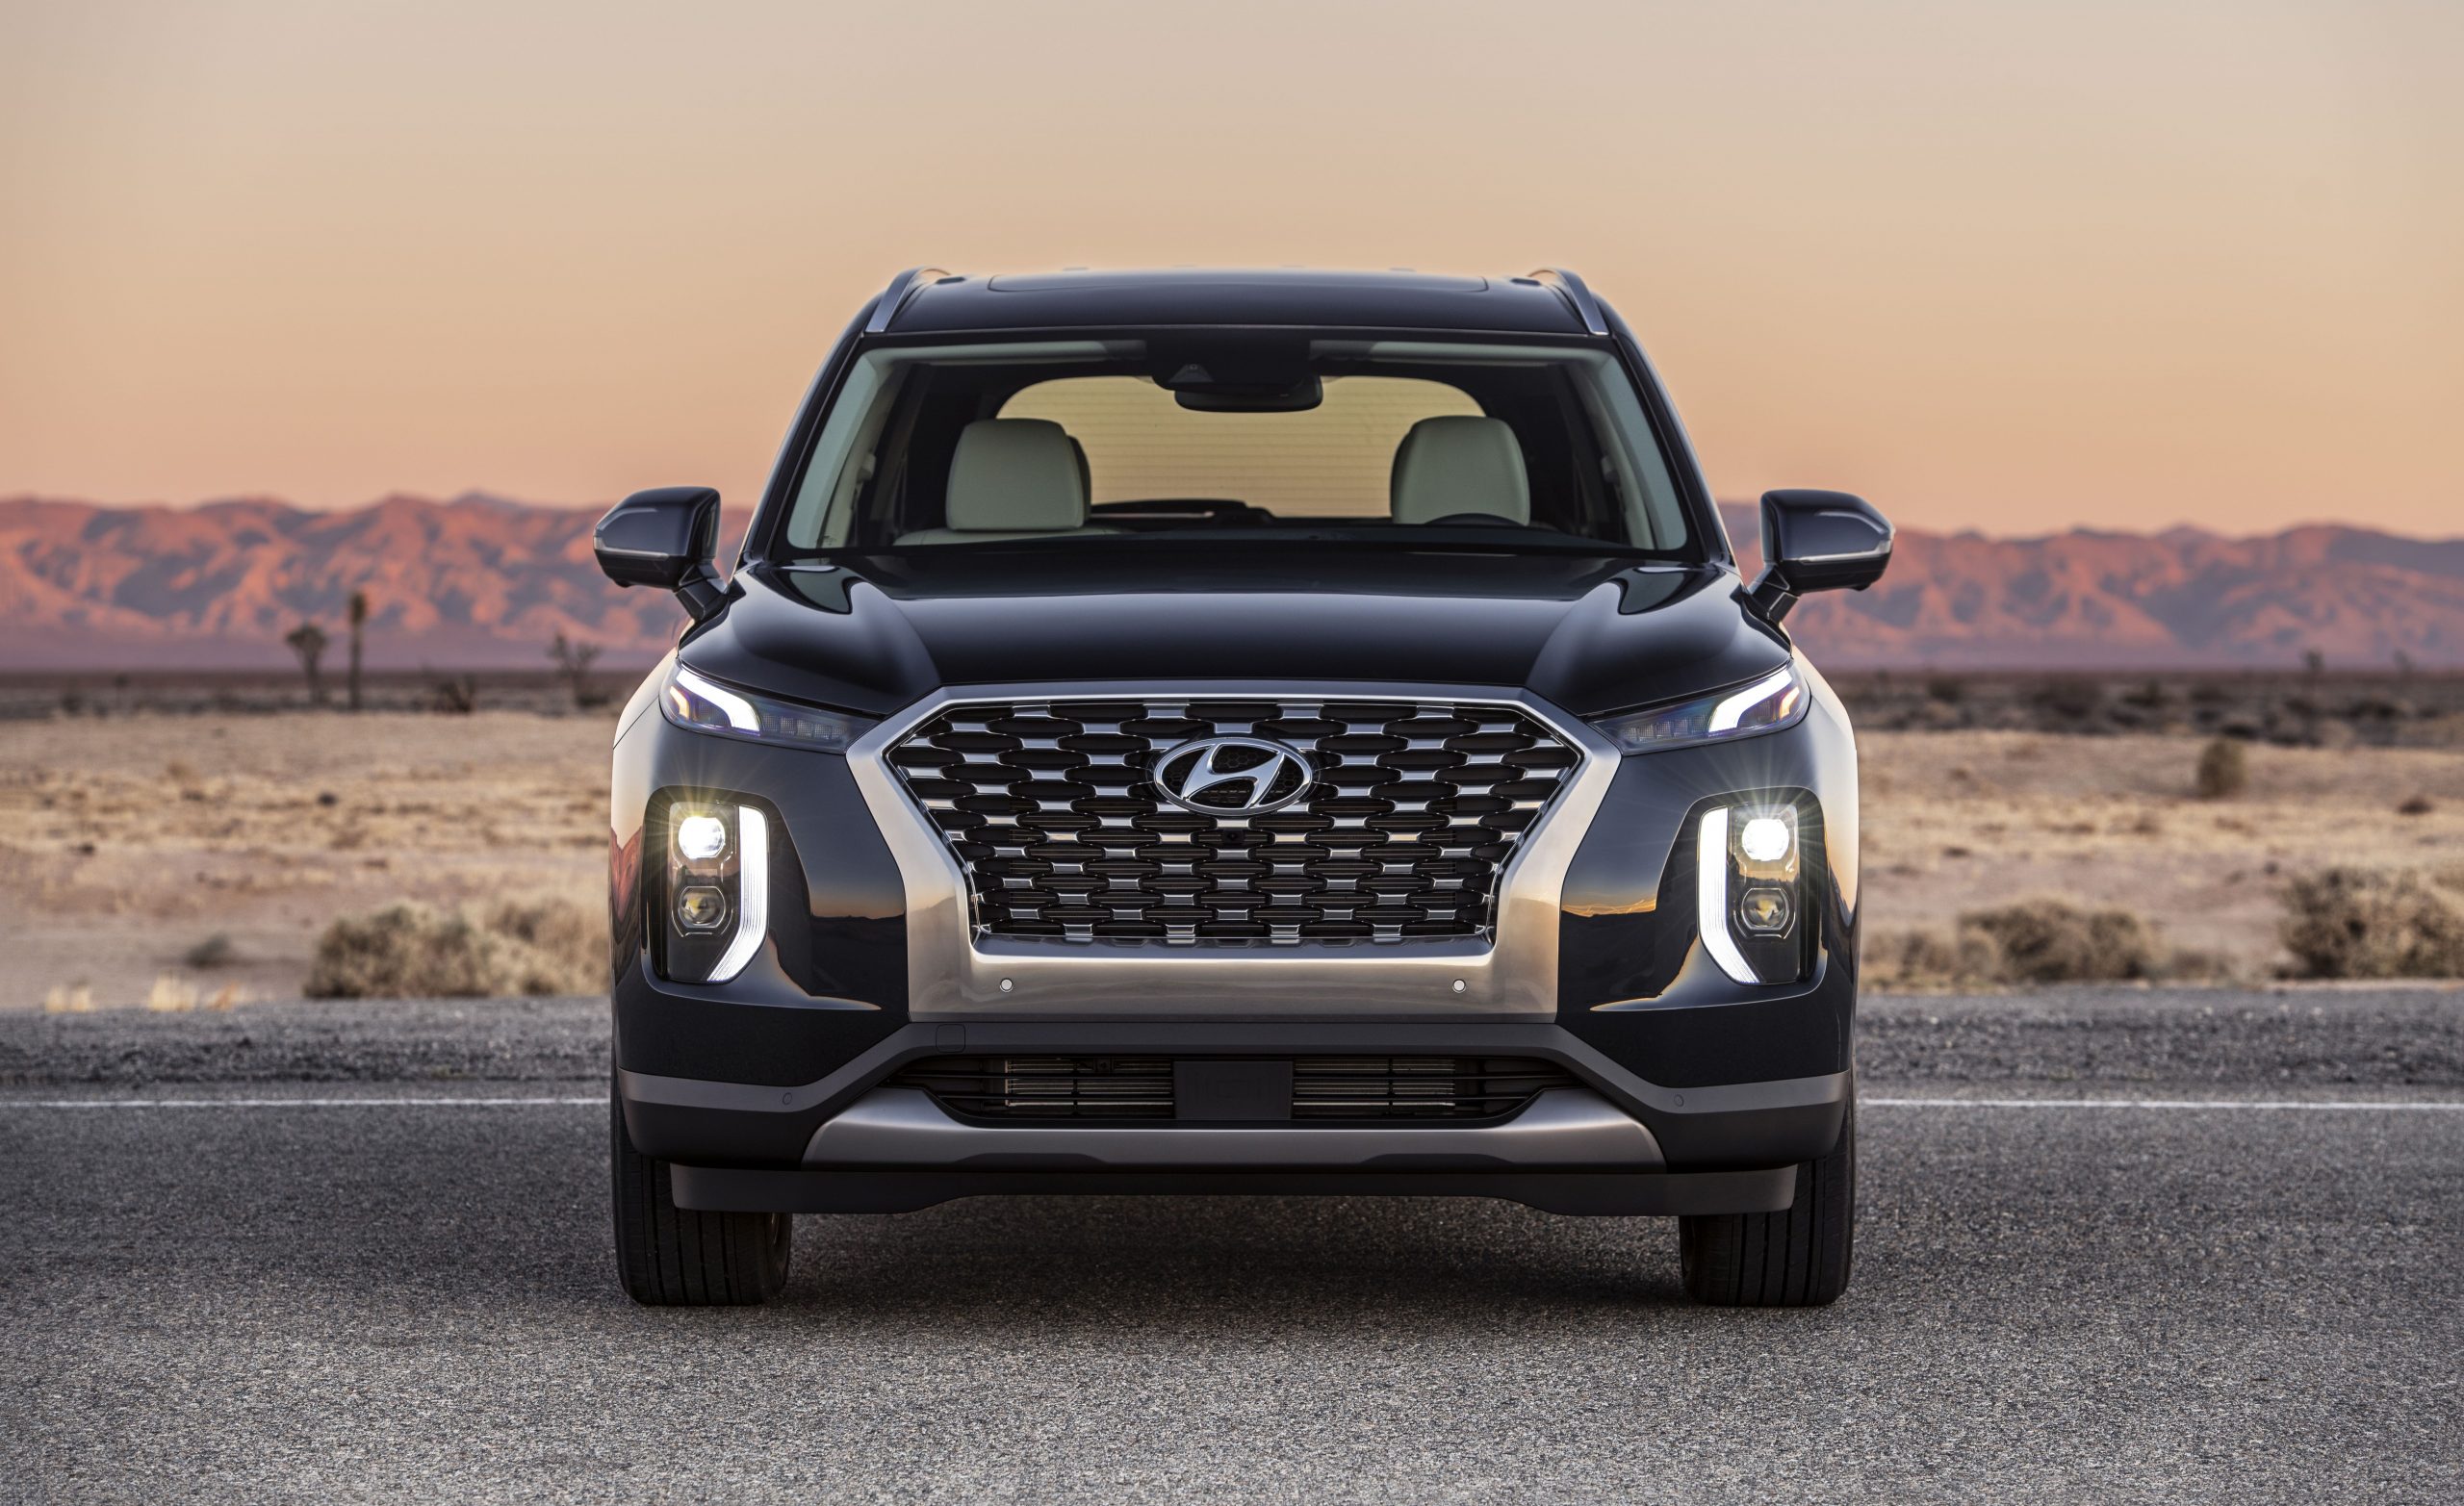 New 2022 Hyundai Palisade Limited Lease Price, Specs ...